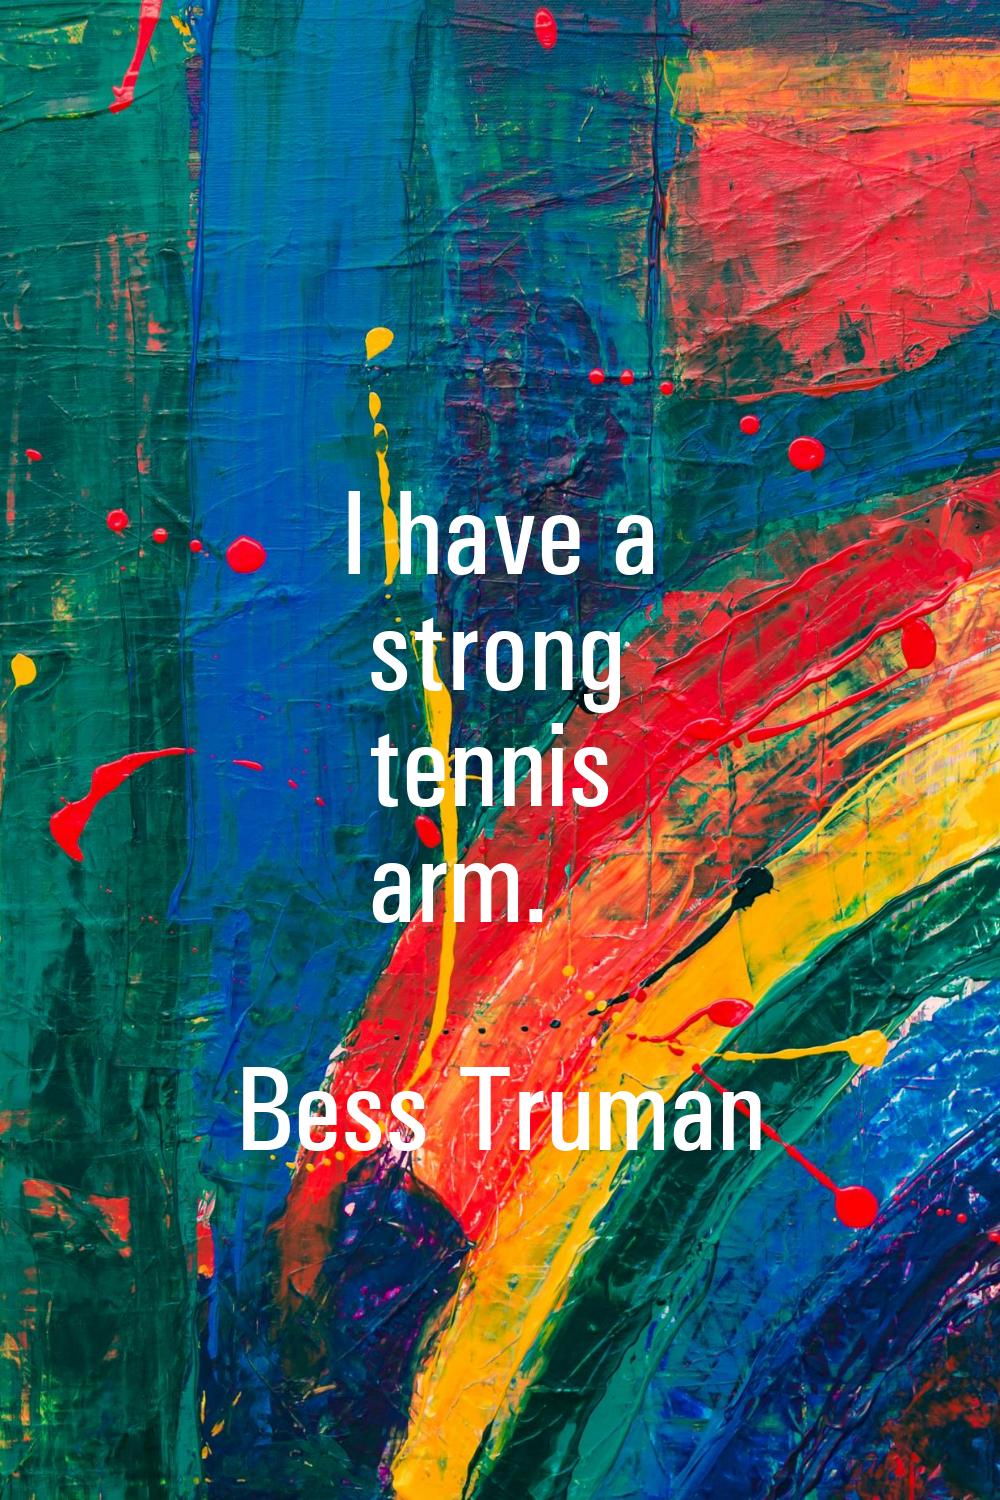 I have a strong tennis arm.